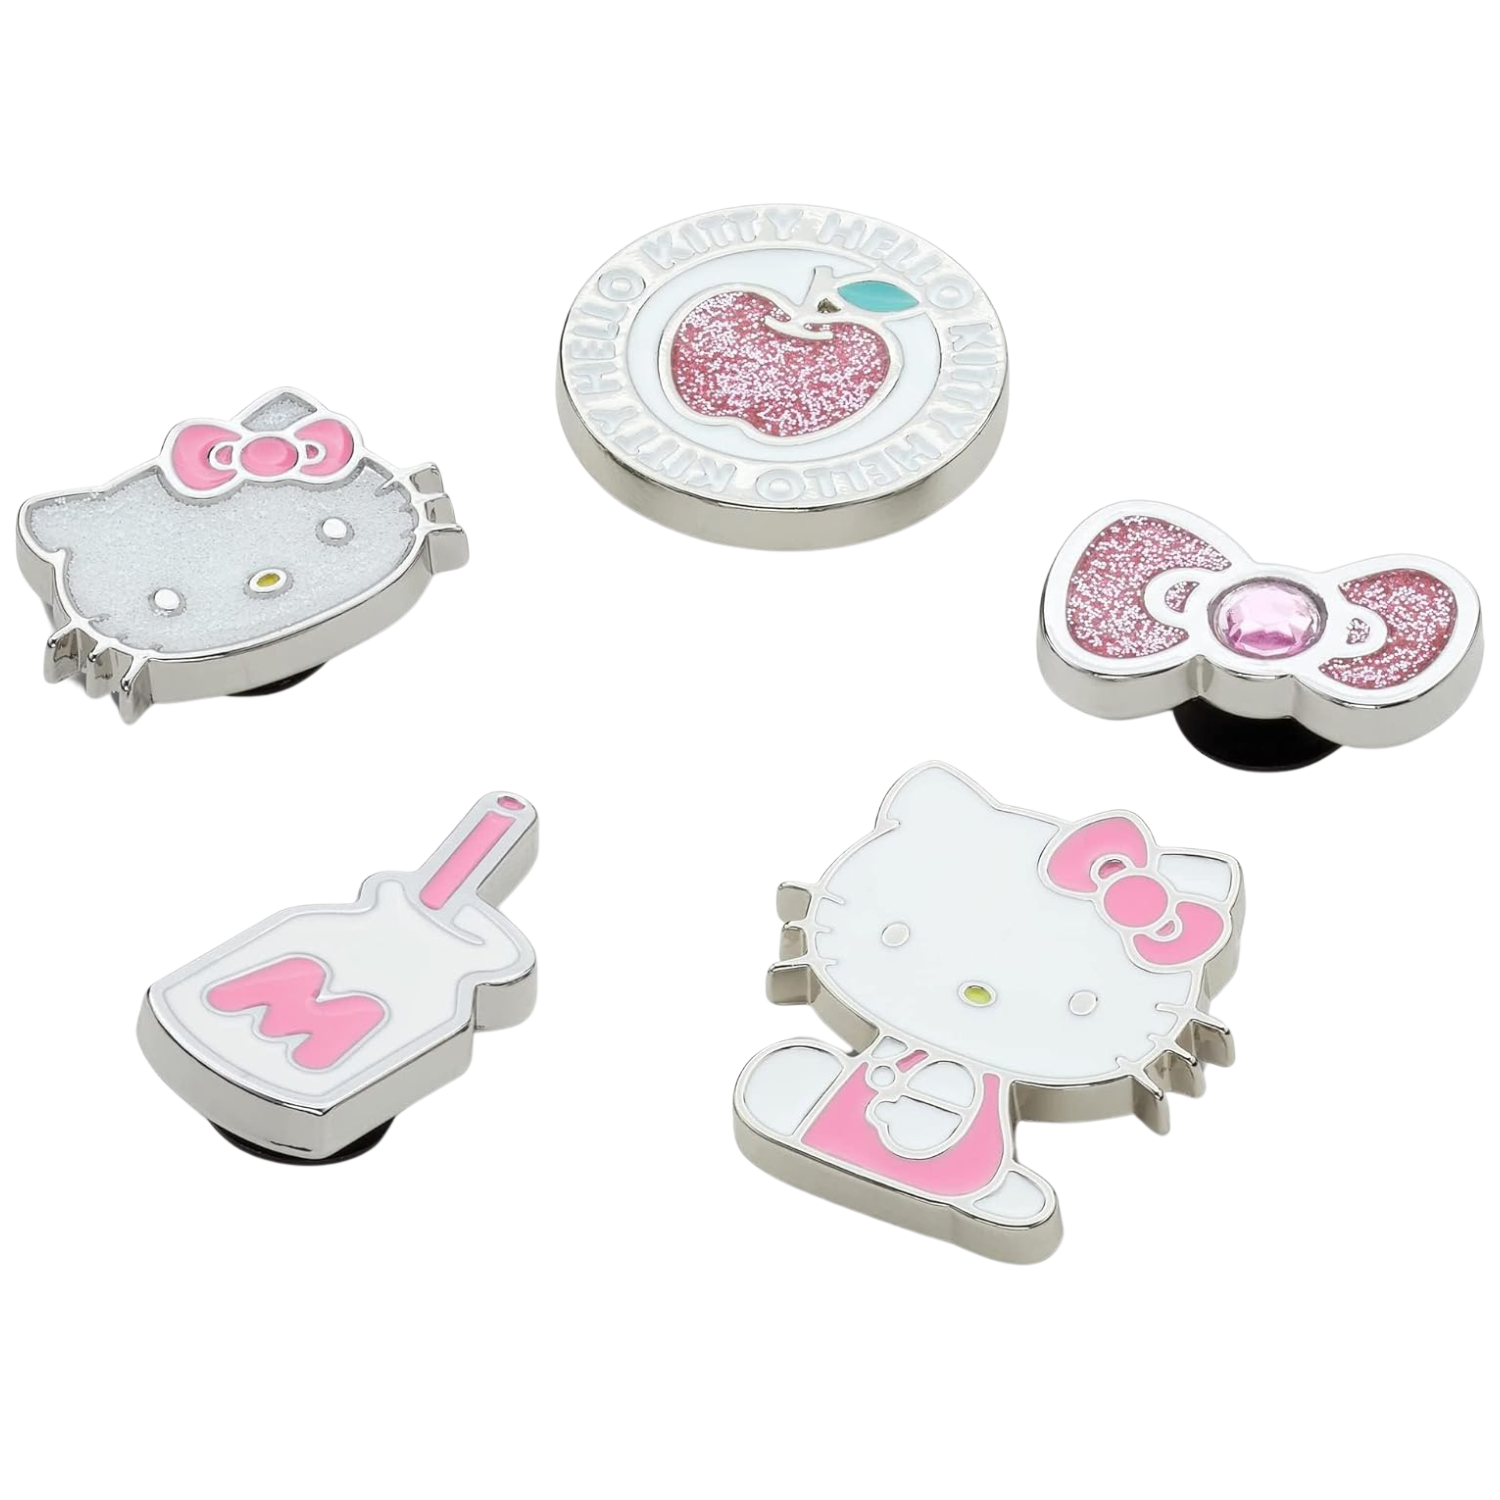 The Hello Kitty X Crocs Collaboration Is Just Too Cute To Pass Up!